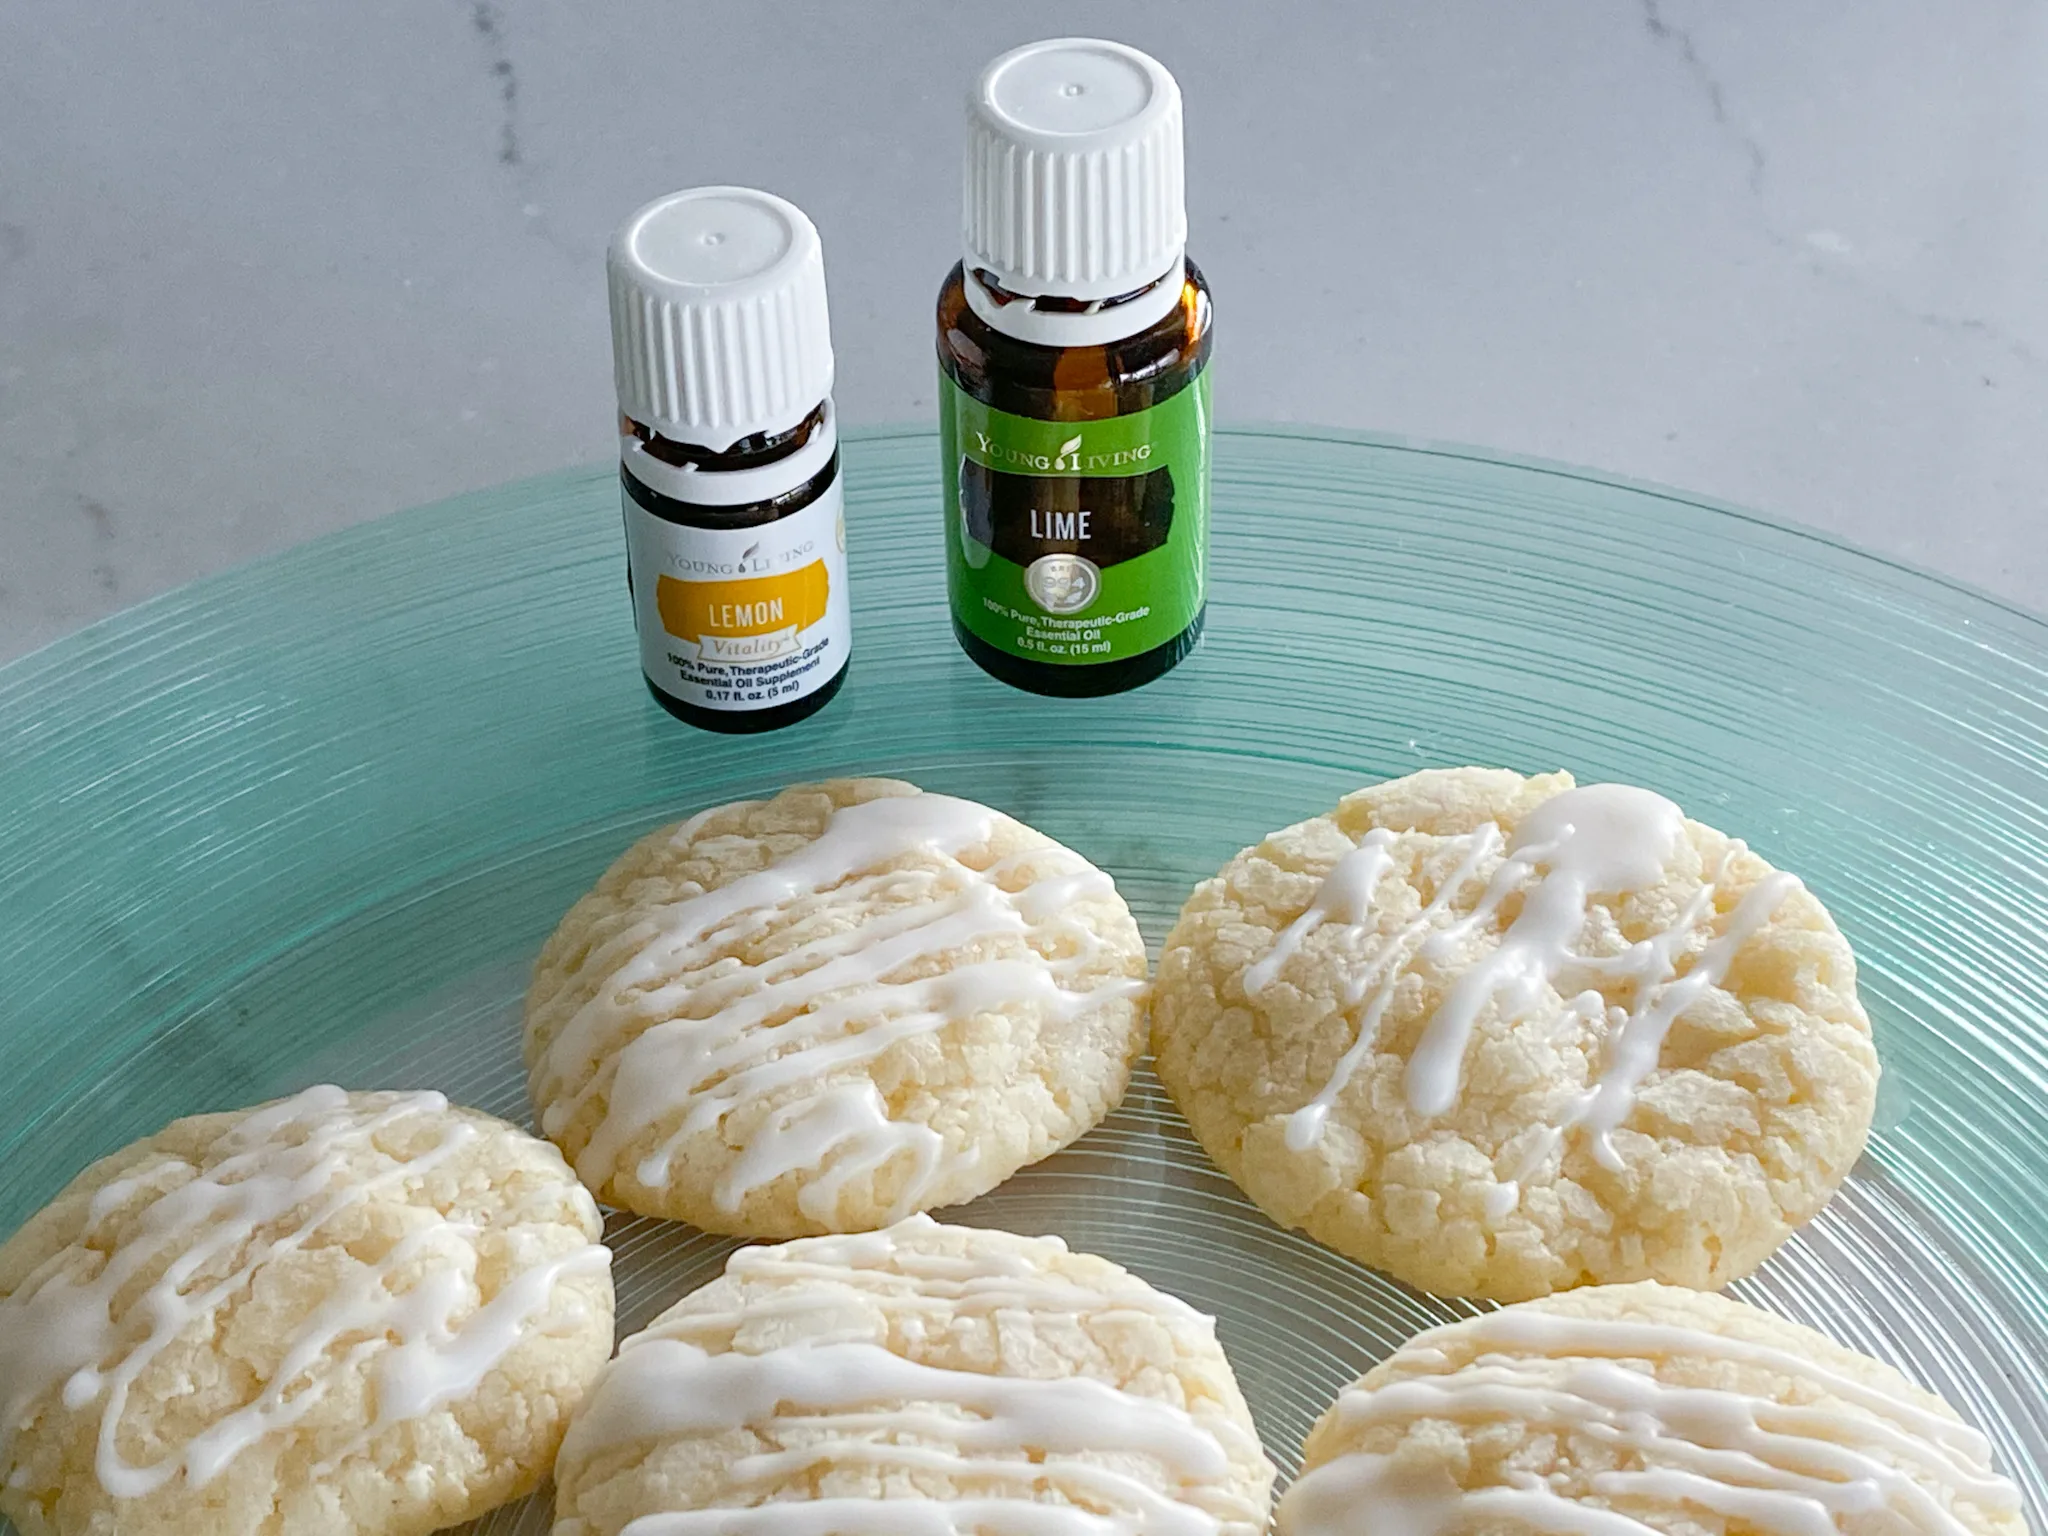 Glazed Lemon Lime cookies on blue green glass plate with bottles of Young Living brand lemon and lime essential oils